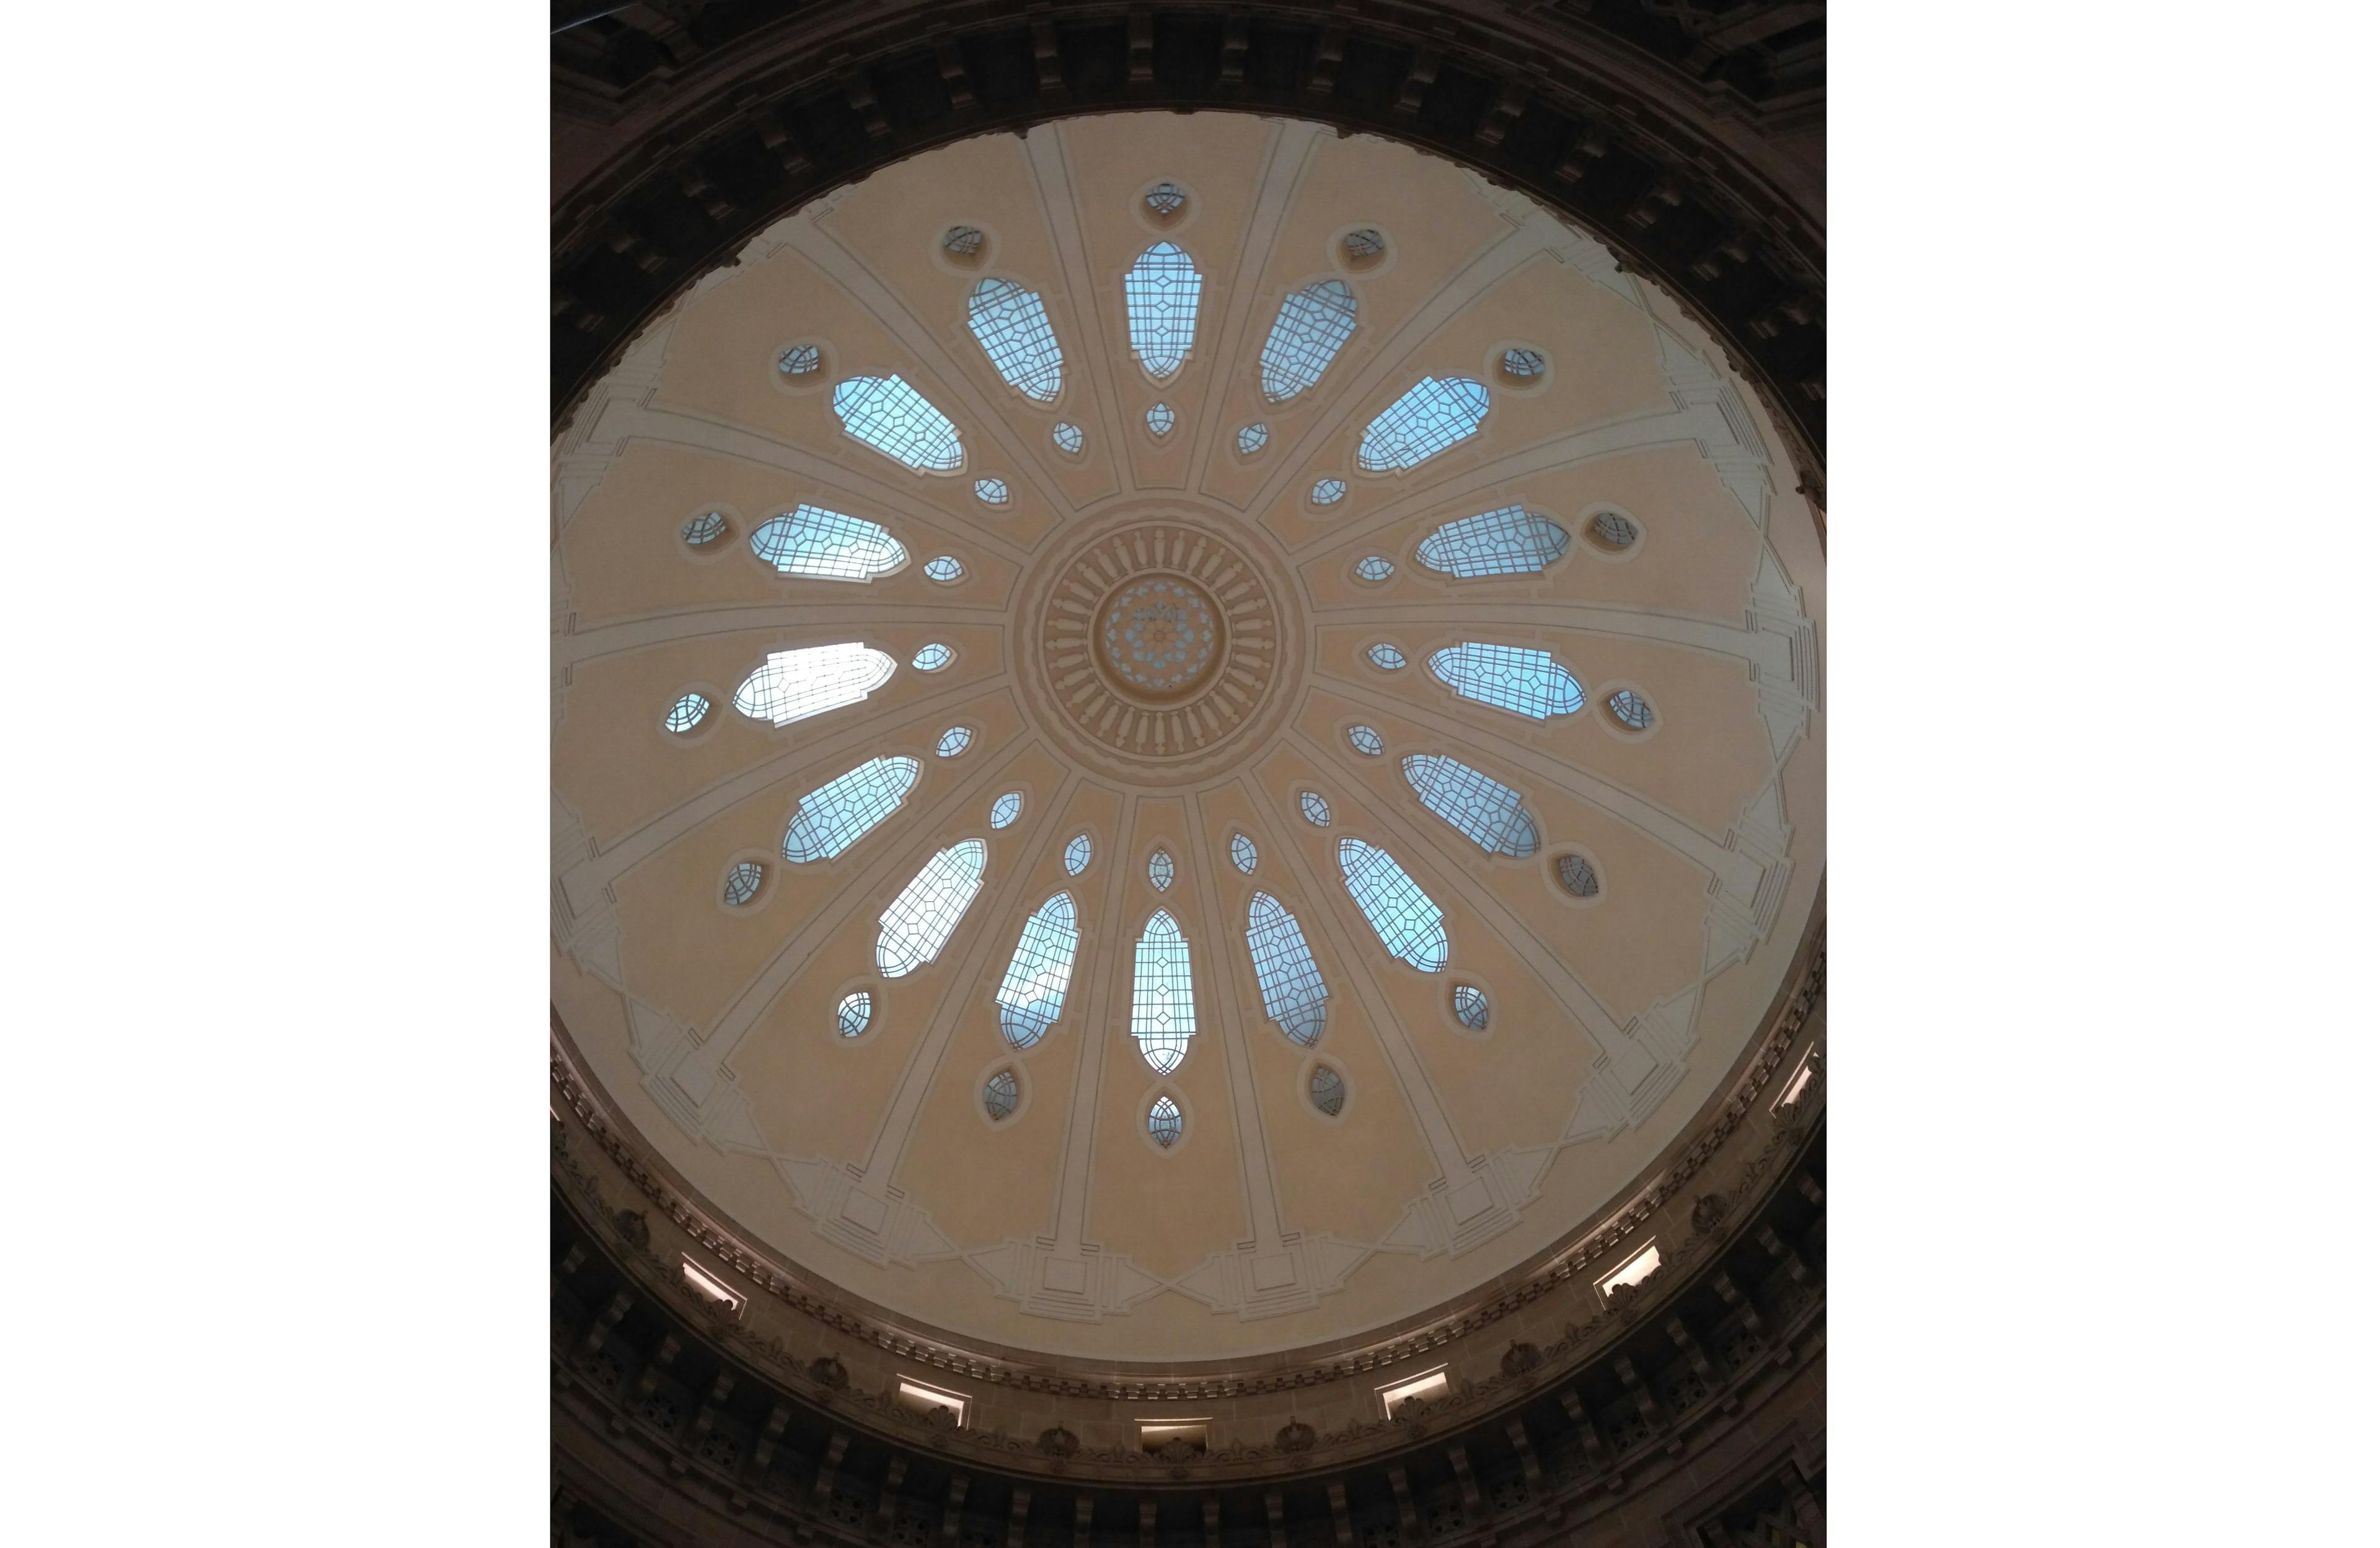 The dome from the inside